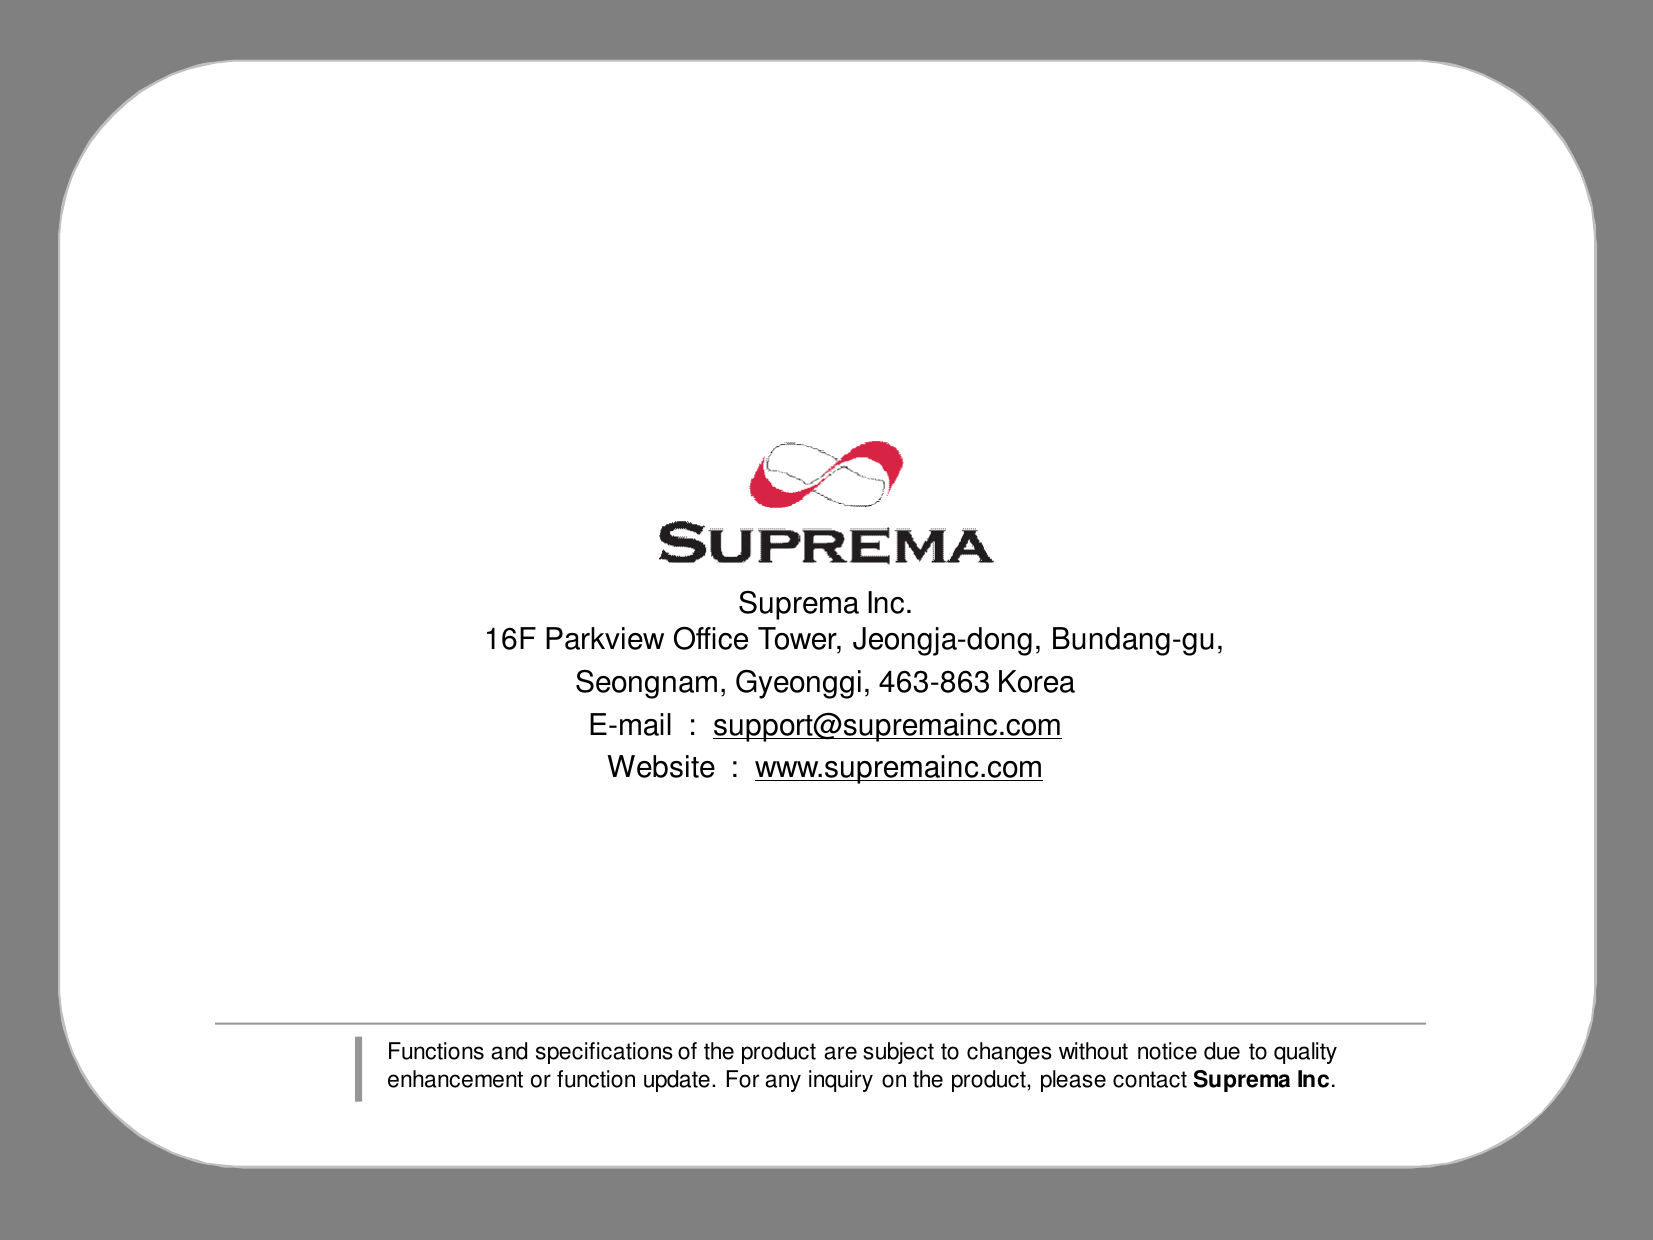 Suprema Inc.16F Parkview Office Tower, Jeongja-dong, Bundang-gu, Seongnam, Gyeonggi, 463-863 KoreaE-mail  :  support@supremainc.comWebsite  :  www.supremainc.comFunctions and specifications of the product are subject to changes without notice due to quality enhancement or function update. For any inquiry on the product, please contact Suprema Inc.